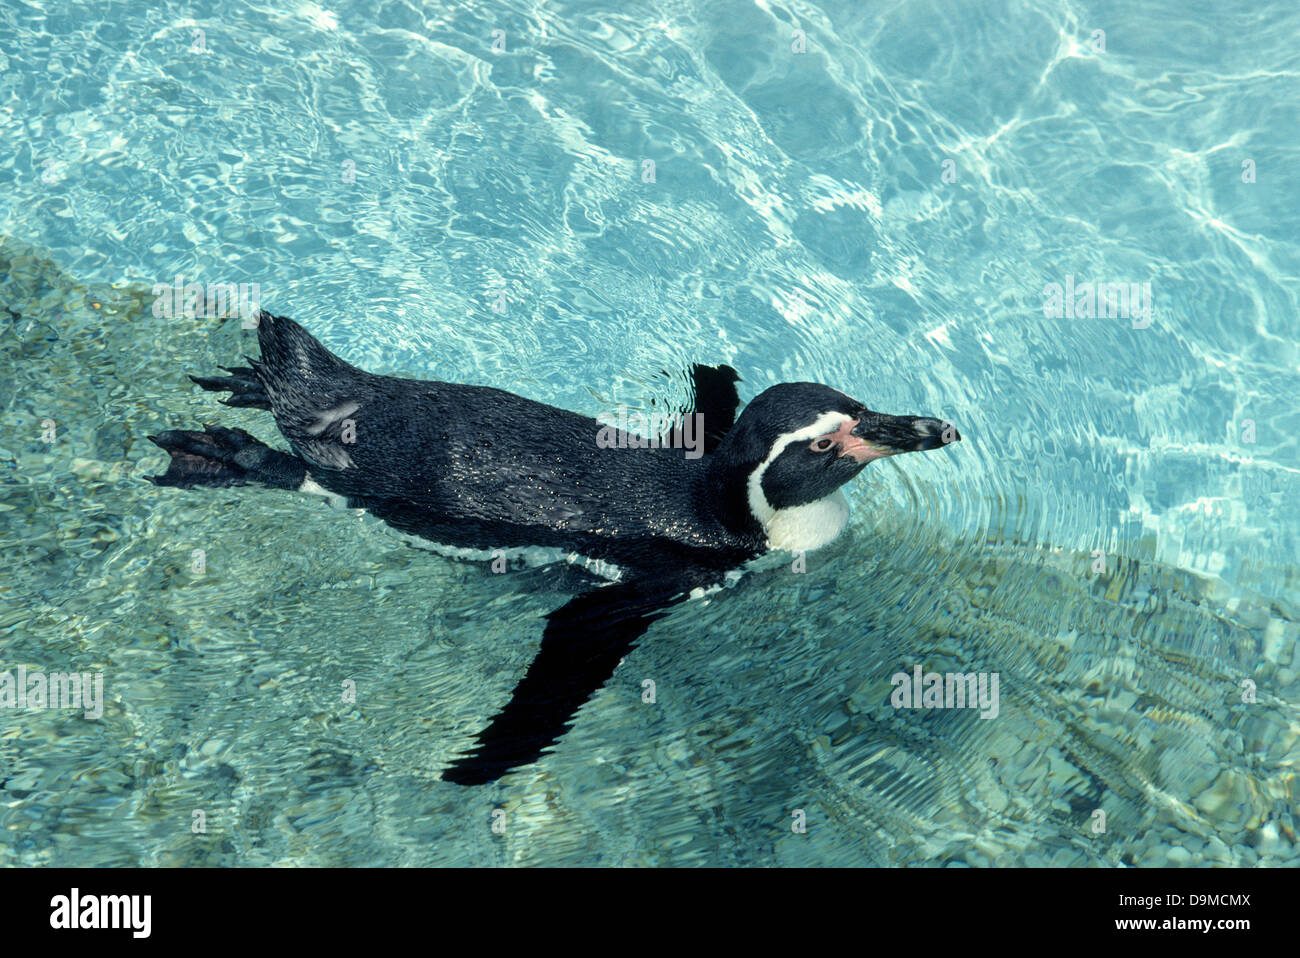 Magellanic Penguins are most often found in the seas around Argentina, Chile and the Falkland Islands, although this one is in an aquarium in the USA. Stock Photo